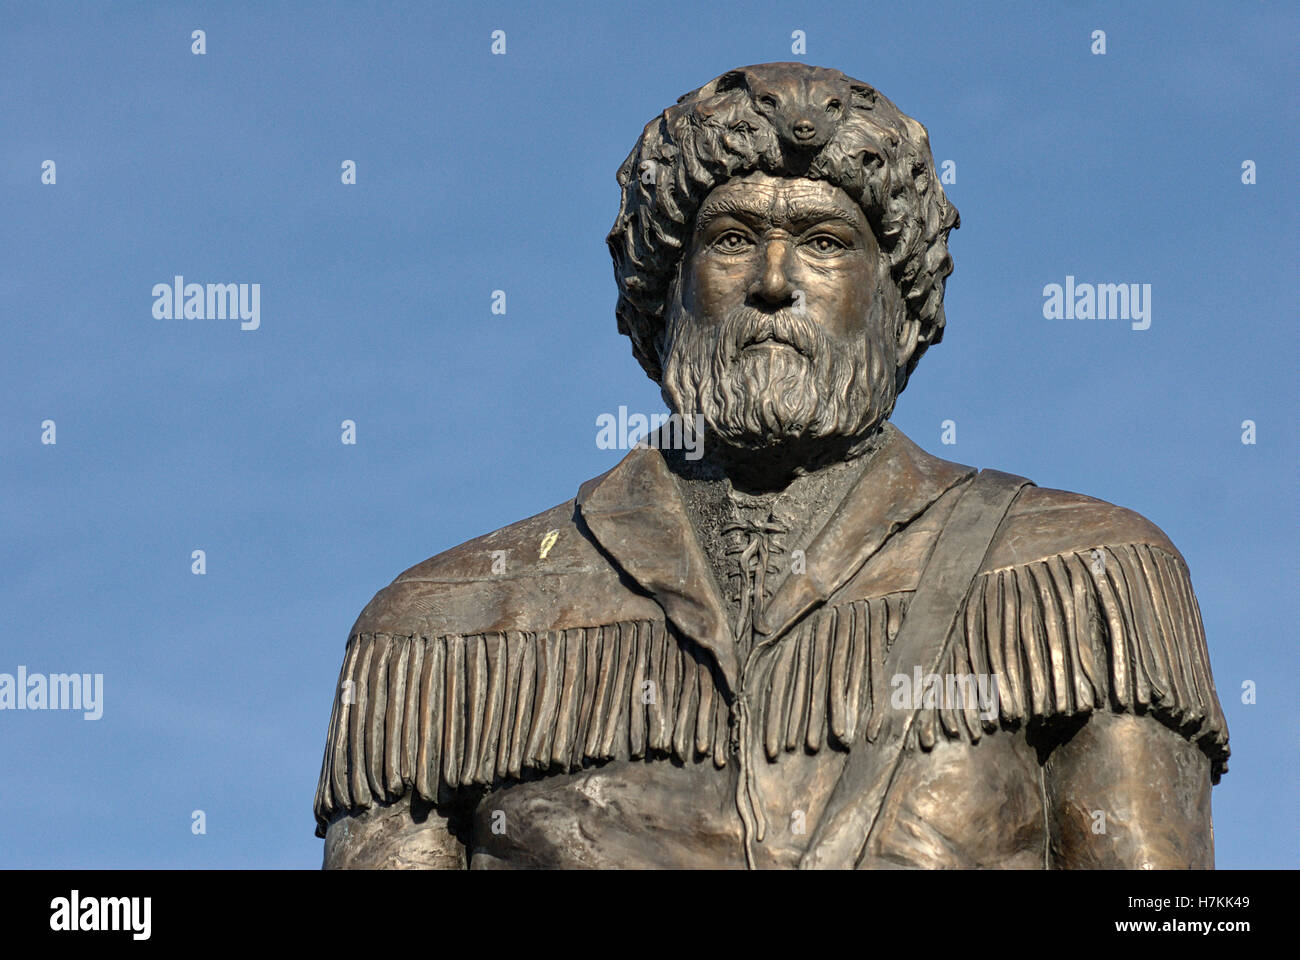 Morgantown, West Virginia, USA - Sculpture of the West Virginia University Mountaineer in front of the WVU Alumni Association building. Stock Photo